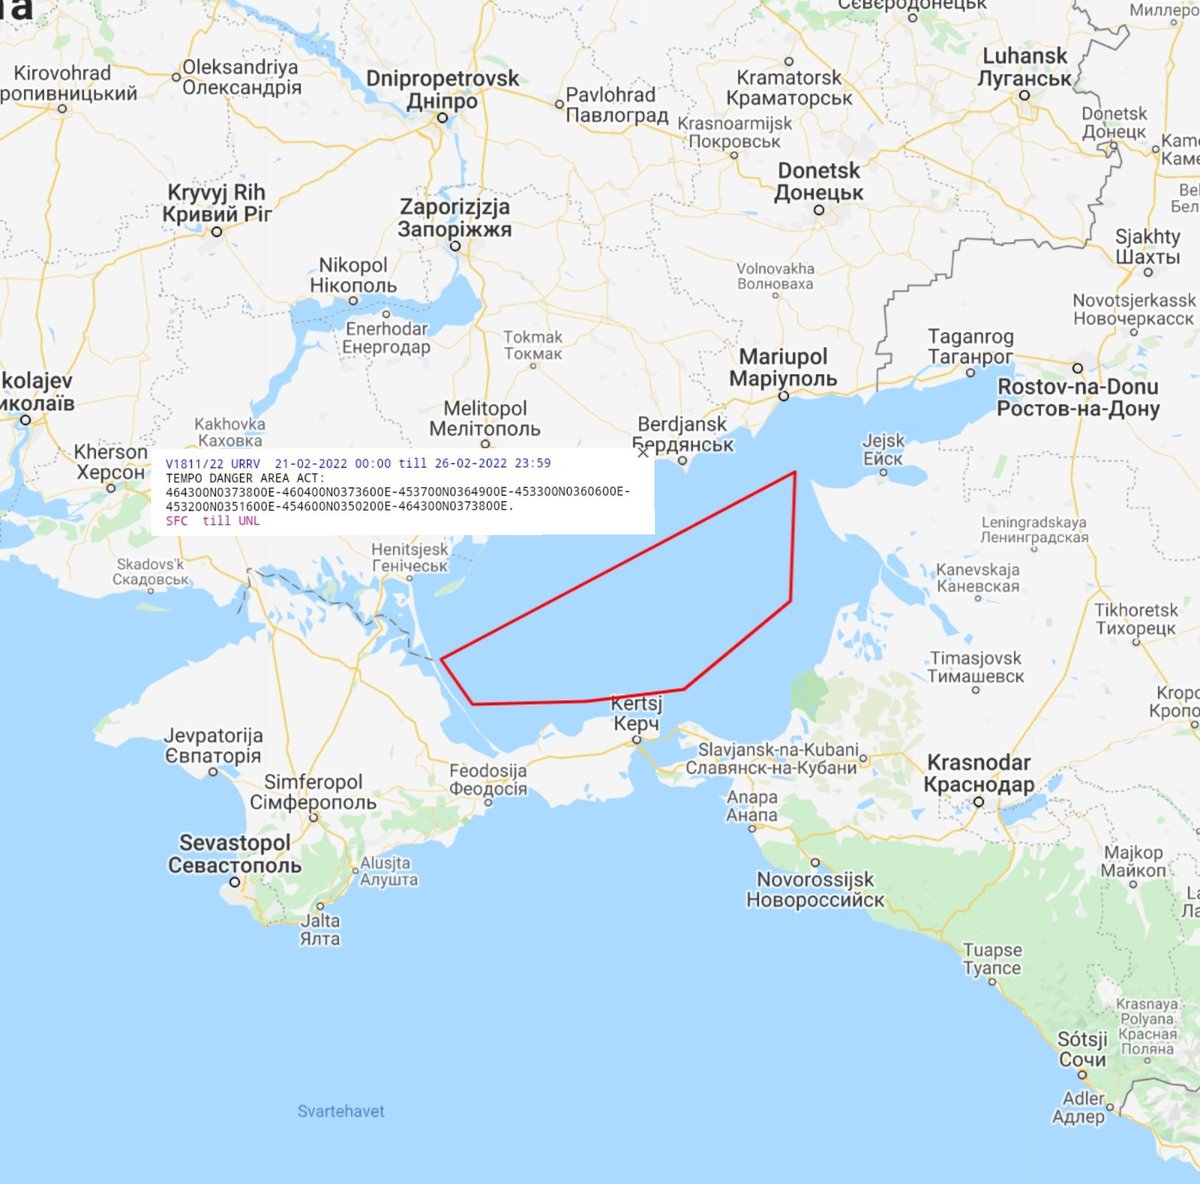 New Sea of Azov NOTAM, going active at midnight: Tempo Danger Area SFC - Unlimited